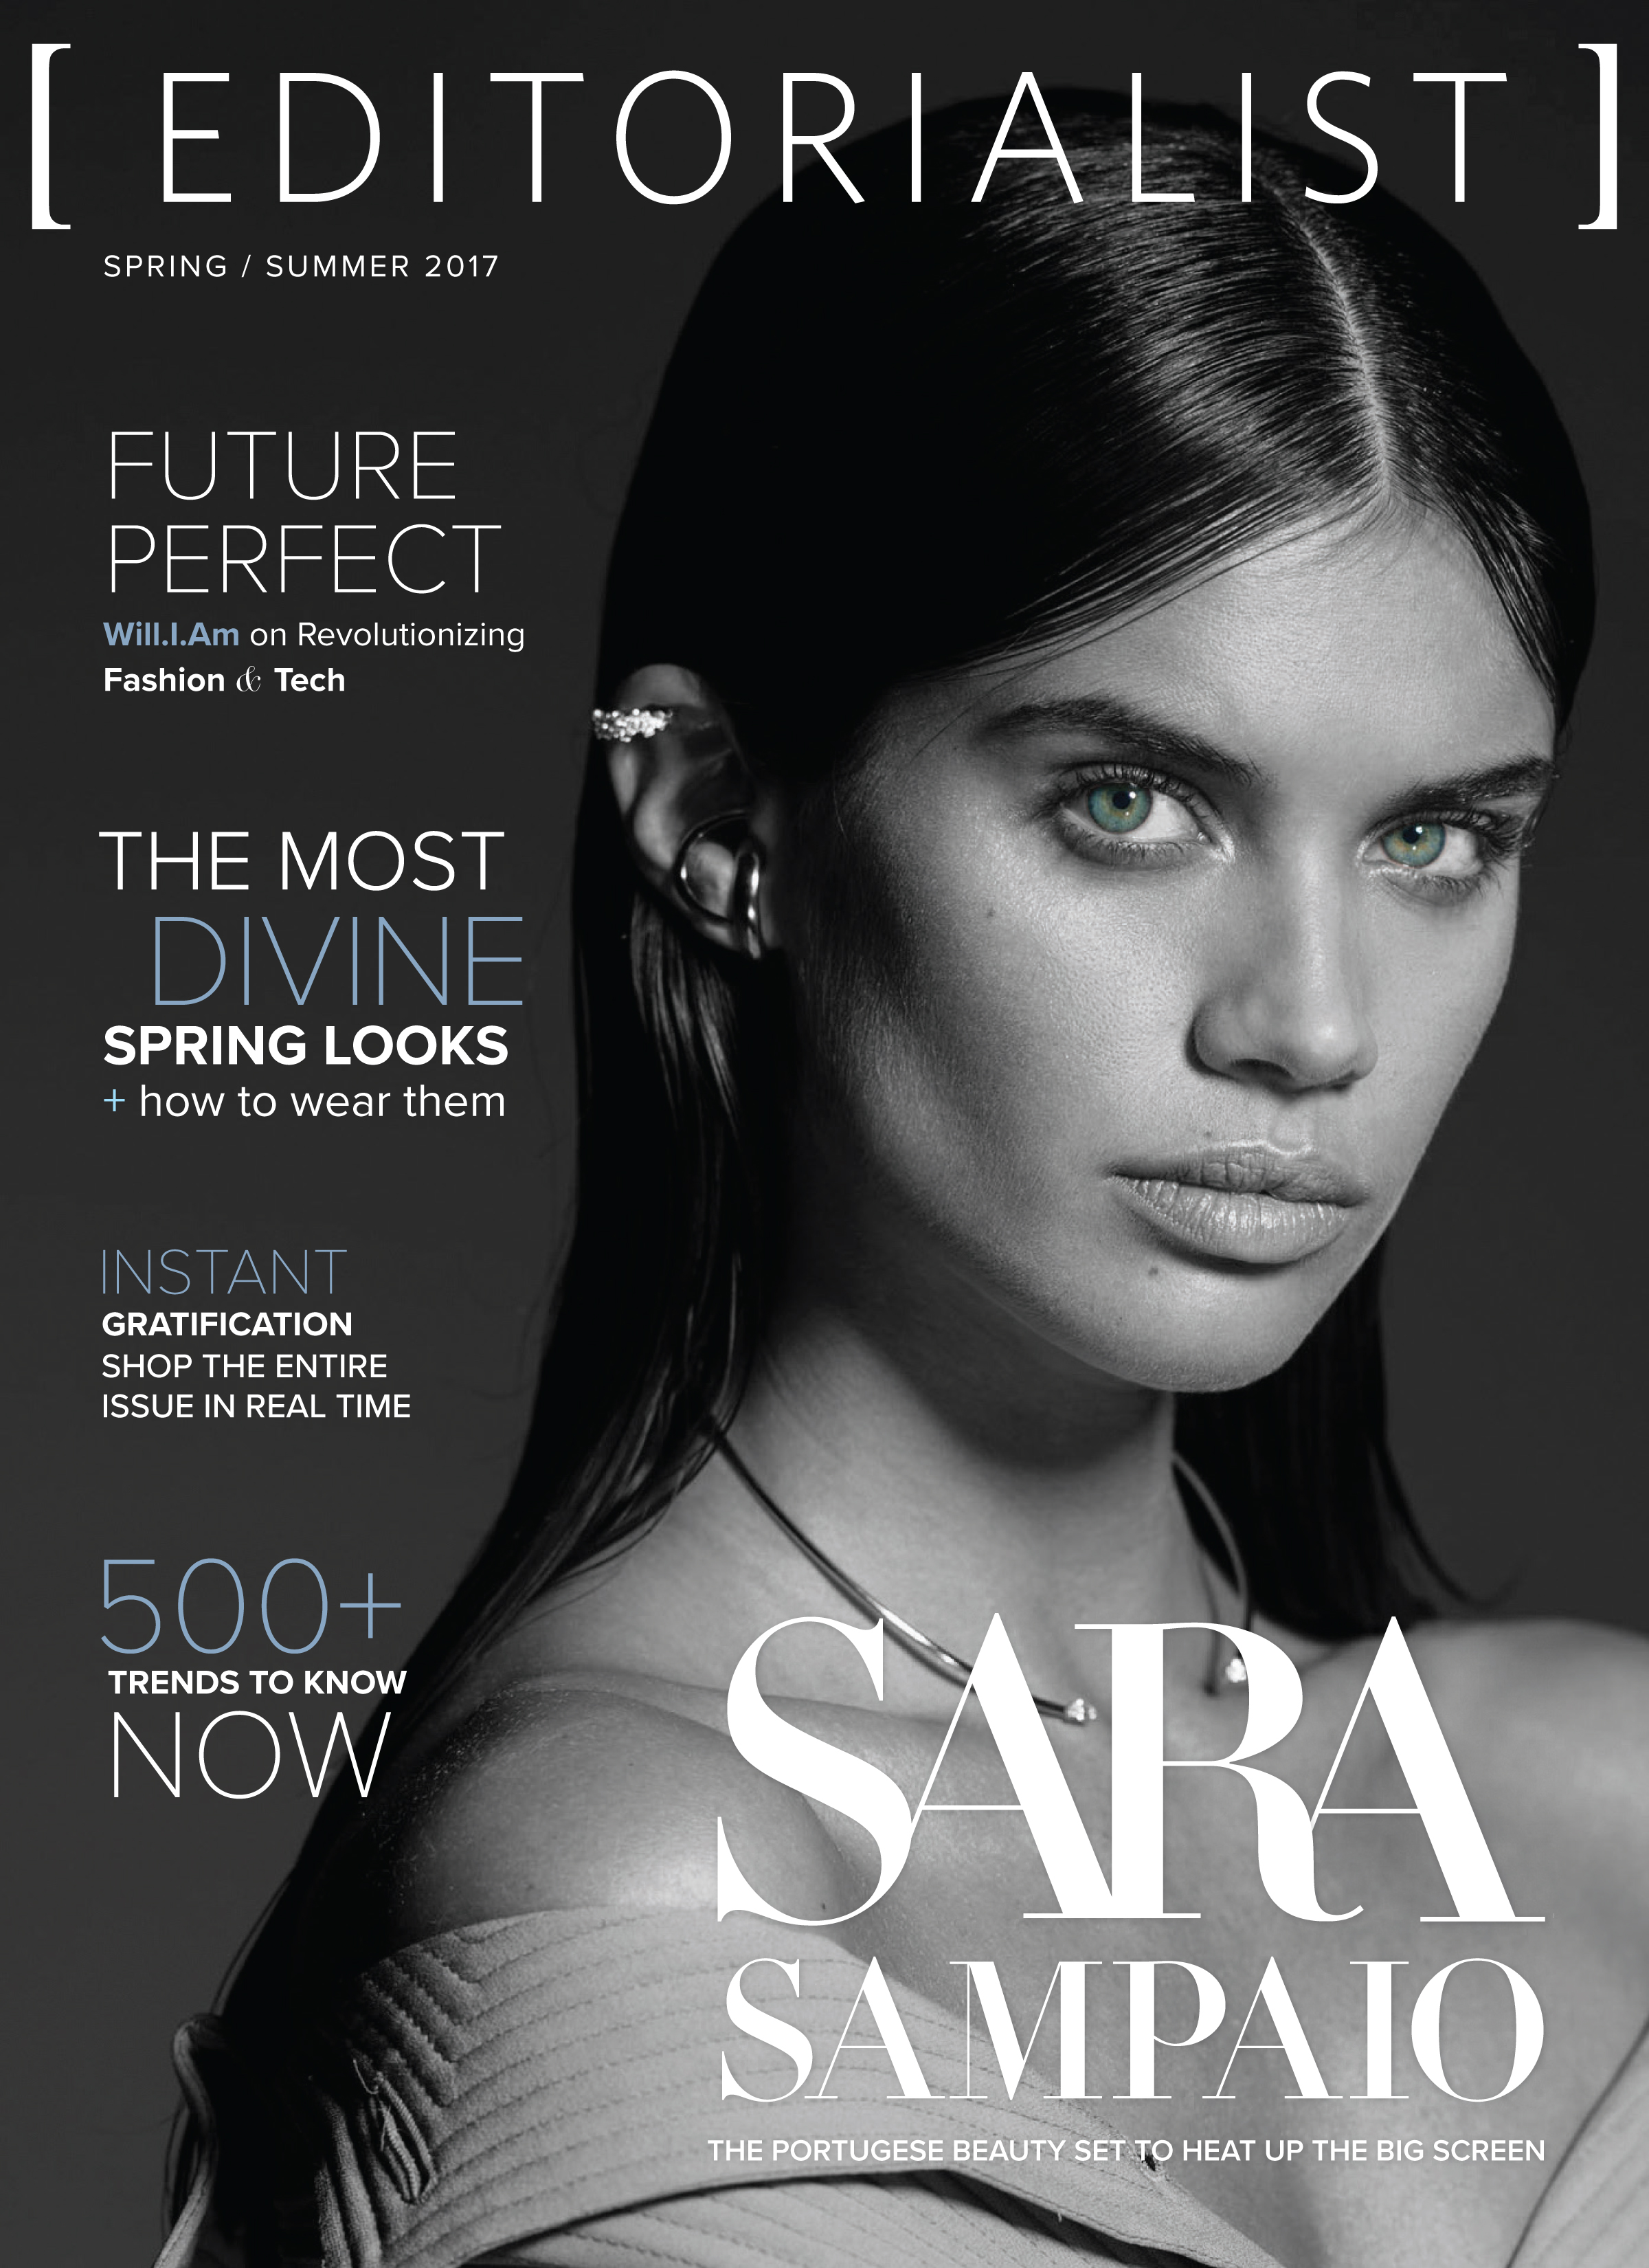 Sara Sampaio Her Ambitions to the Editorialist - Daily Front Row